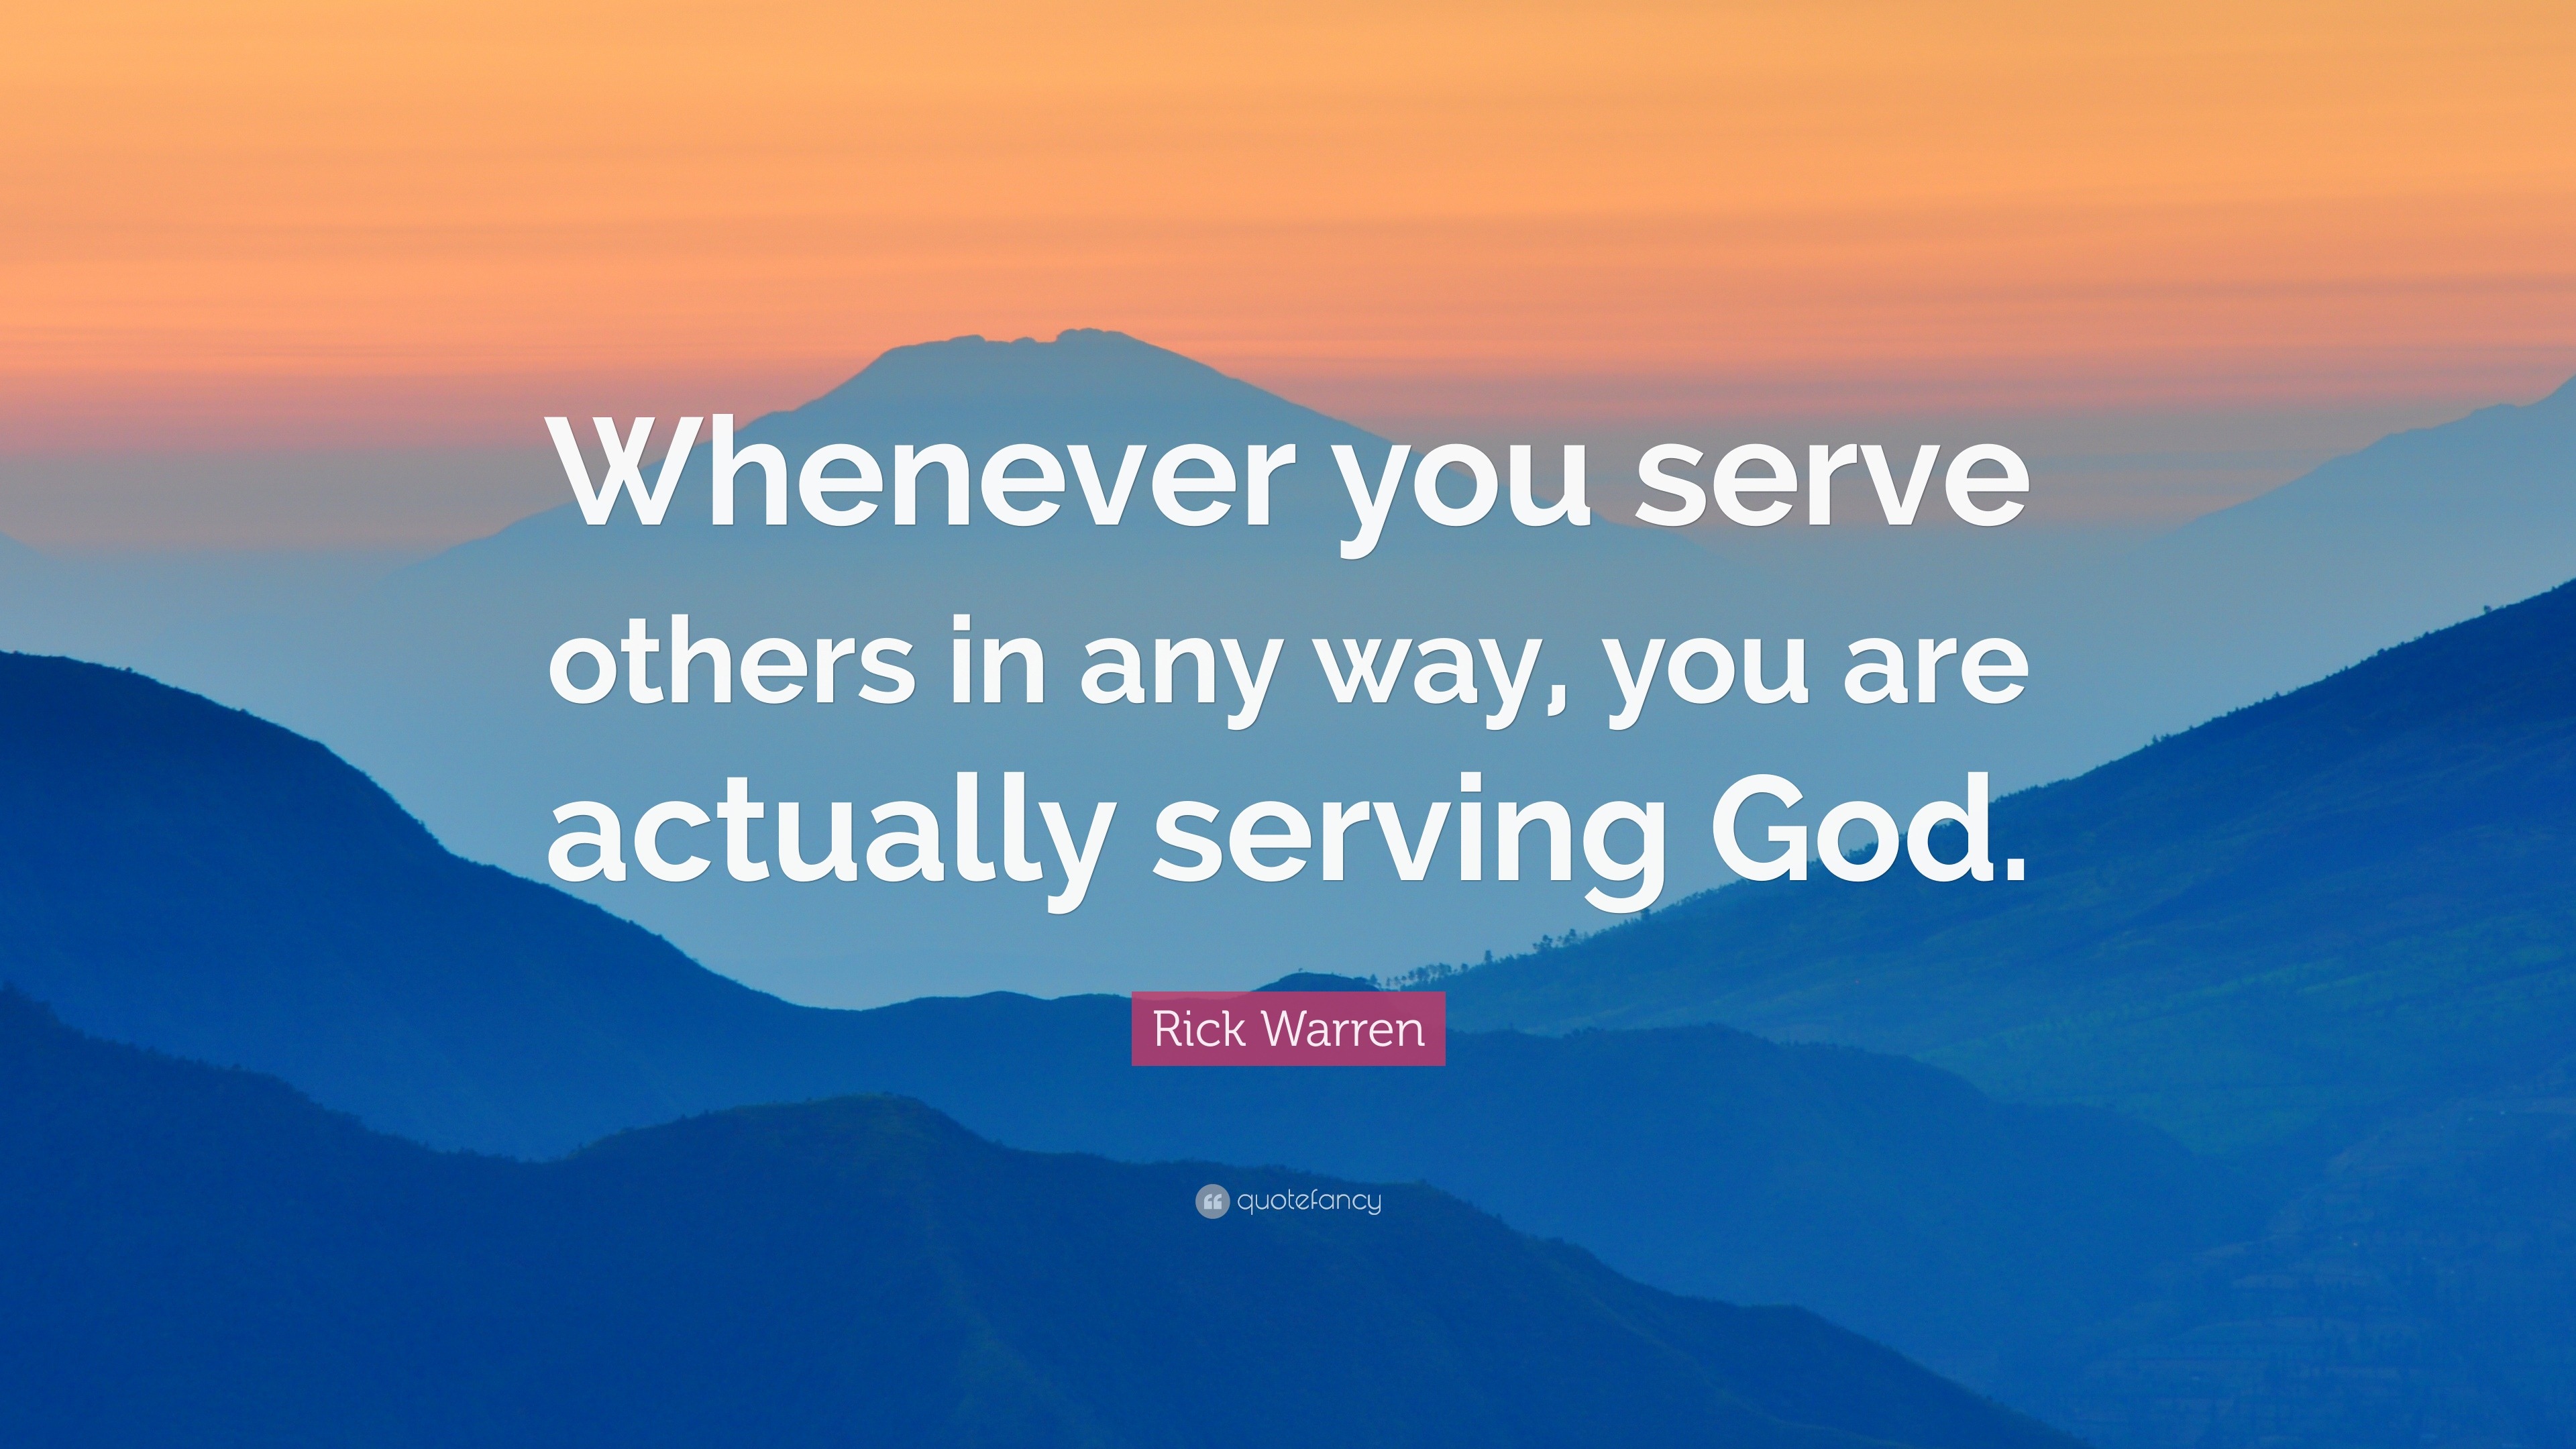 Rick Warren Quote: “Whenever you serve others in any way, you are